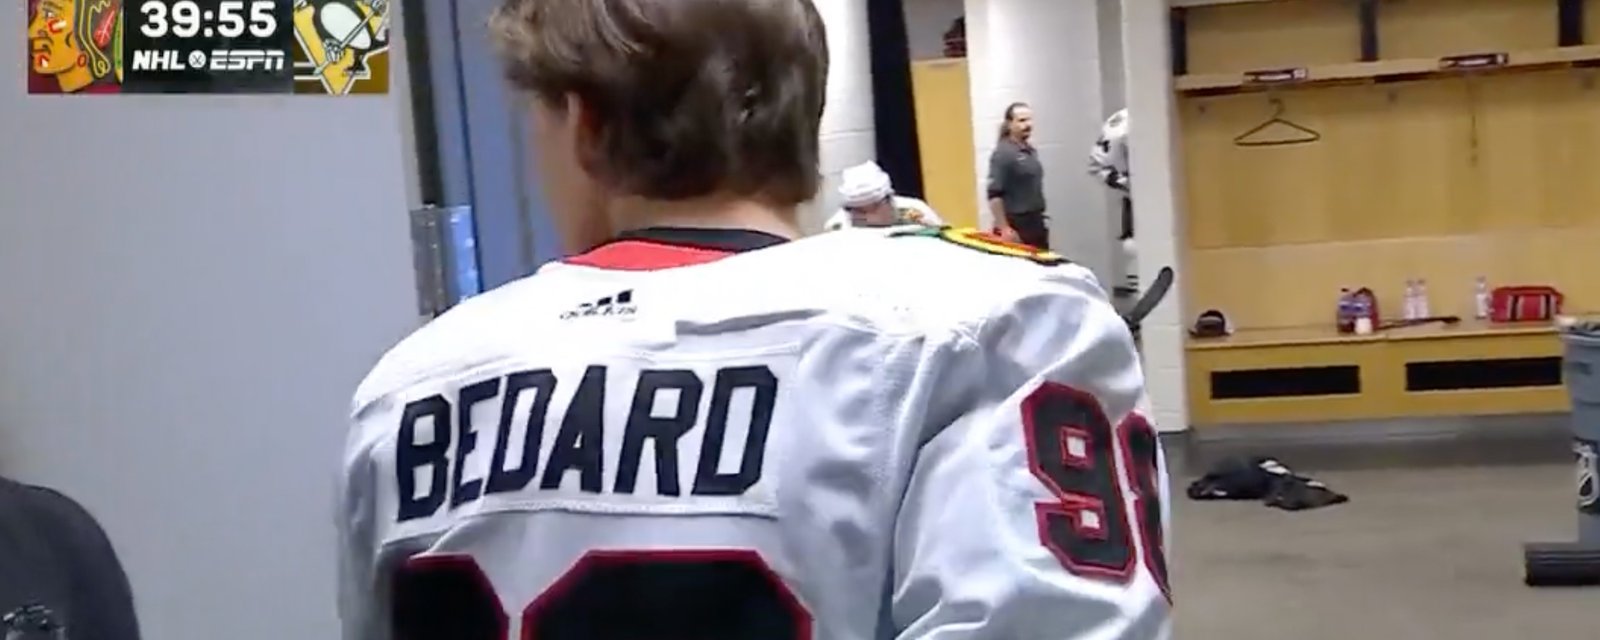 Silly mistake by Connor Bedard caught live right before his first NHL game!